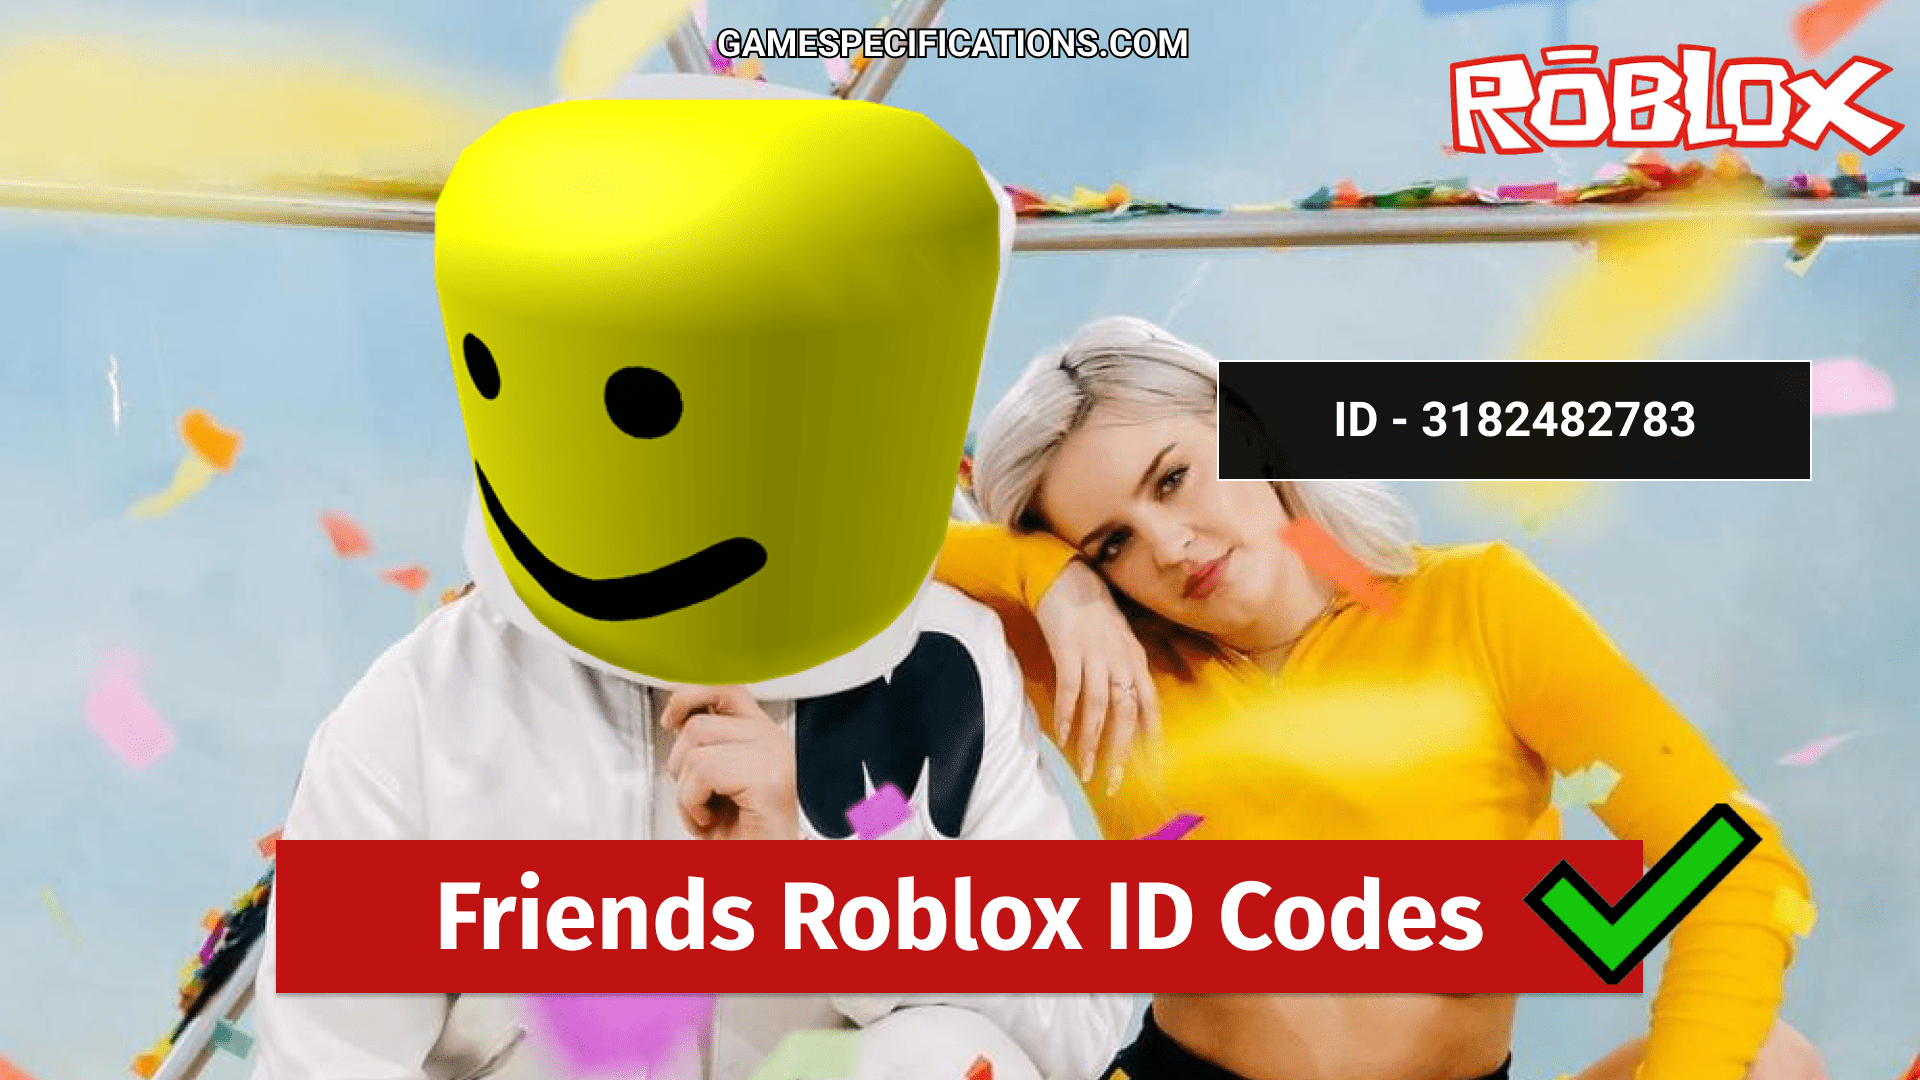 Friends Roblox ID Codes 2021 - Game Specifications